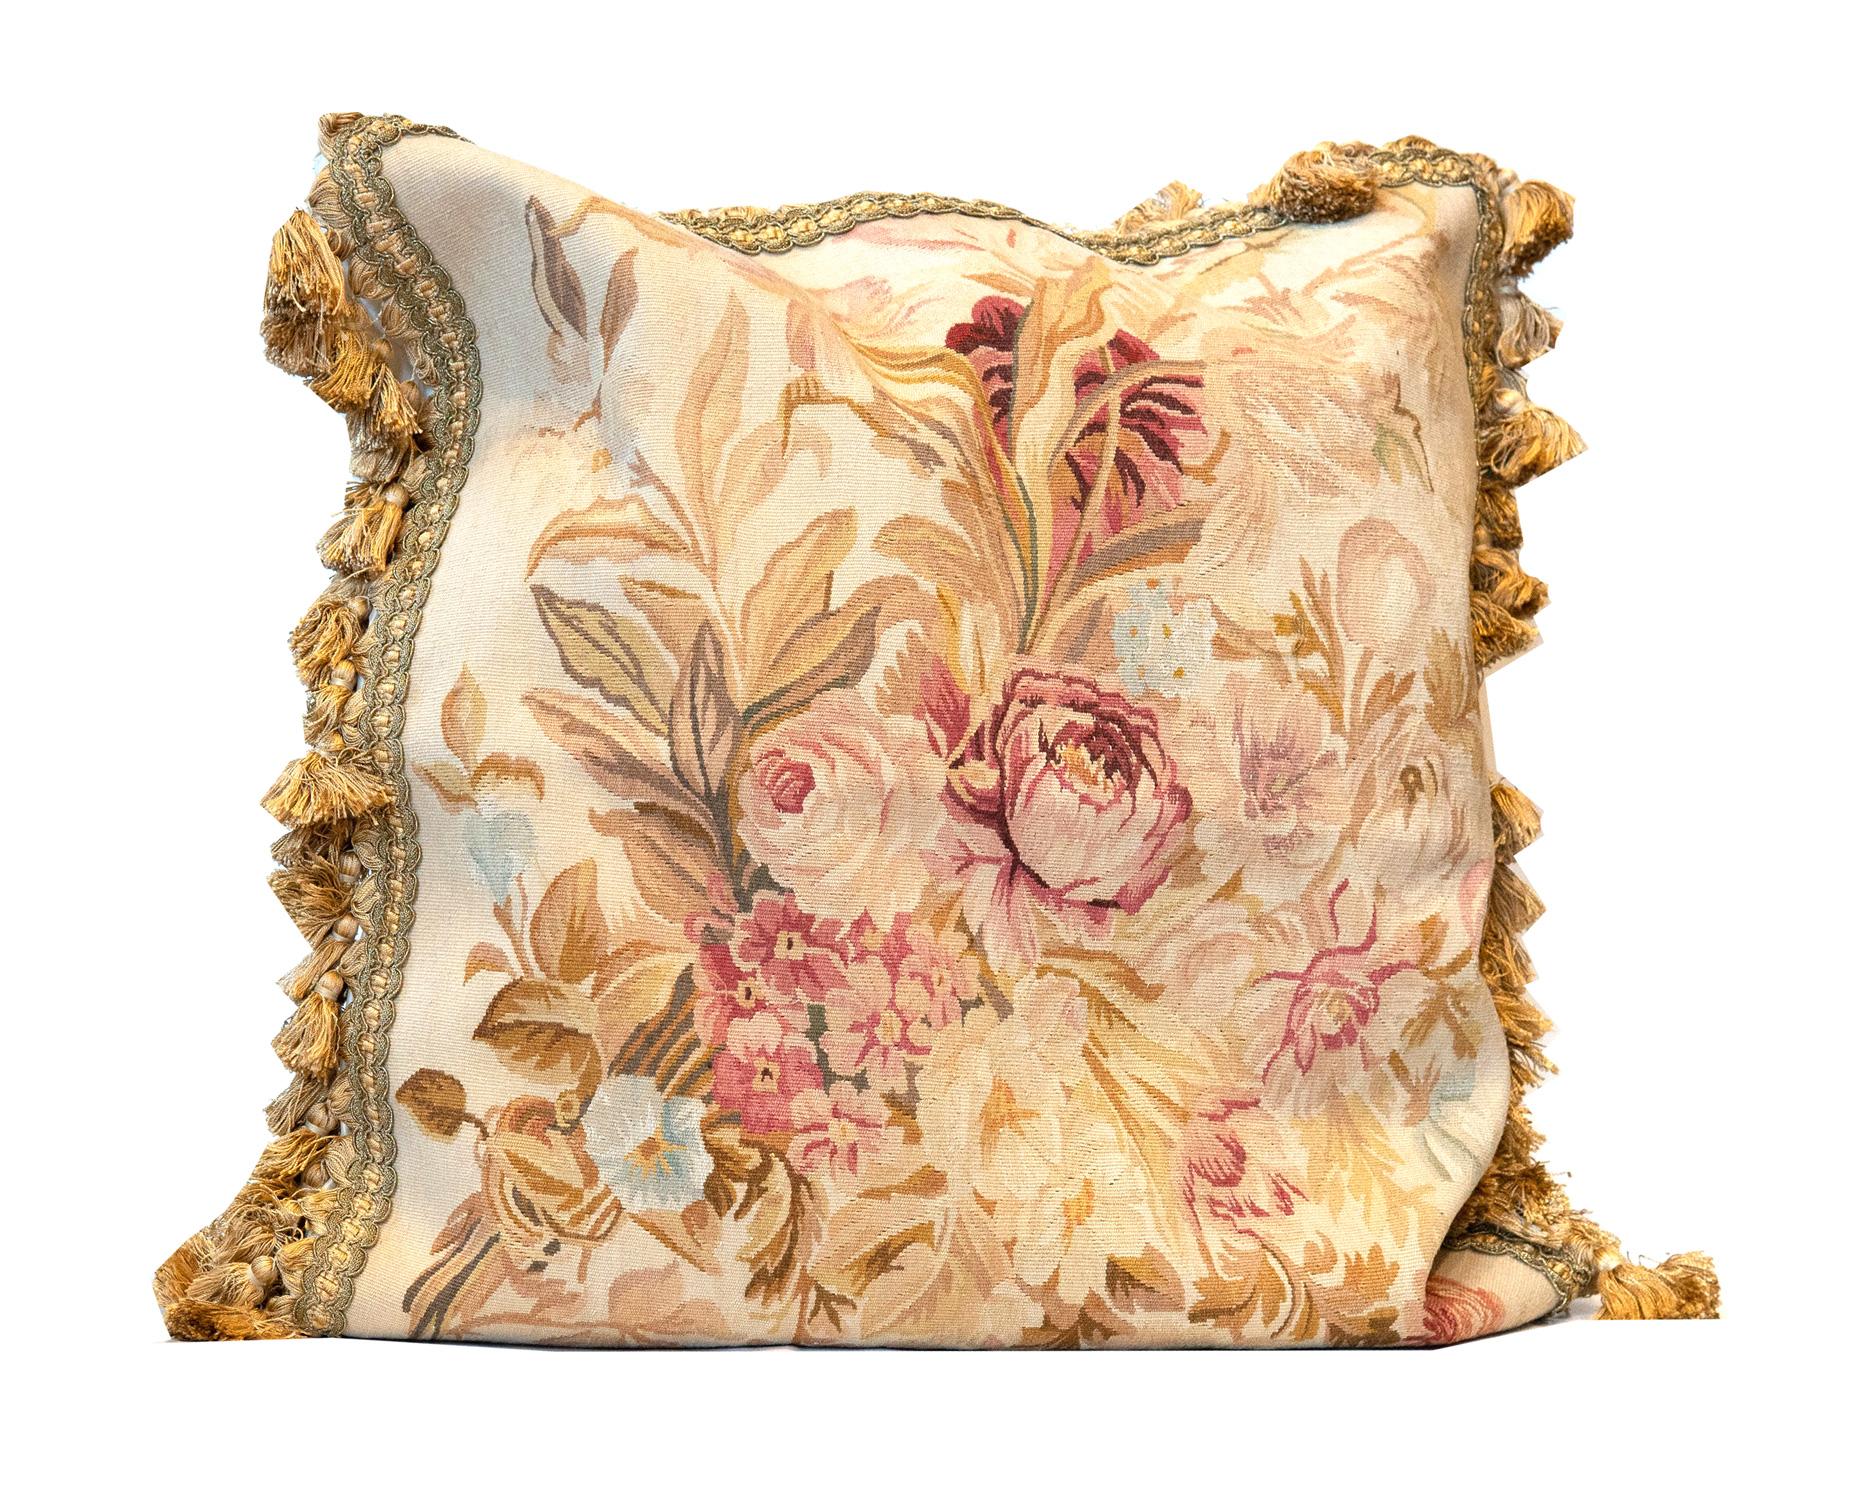 This elegant handmade cushion cover has been woven with the finest materials with a fantastic floral design. The flowers have been incorporated in cream, beige, and pink accent colours on a subtle background and finished with a delicate pom-pom